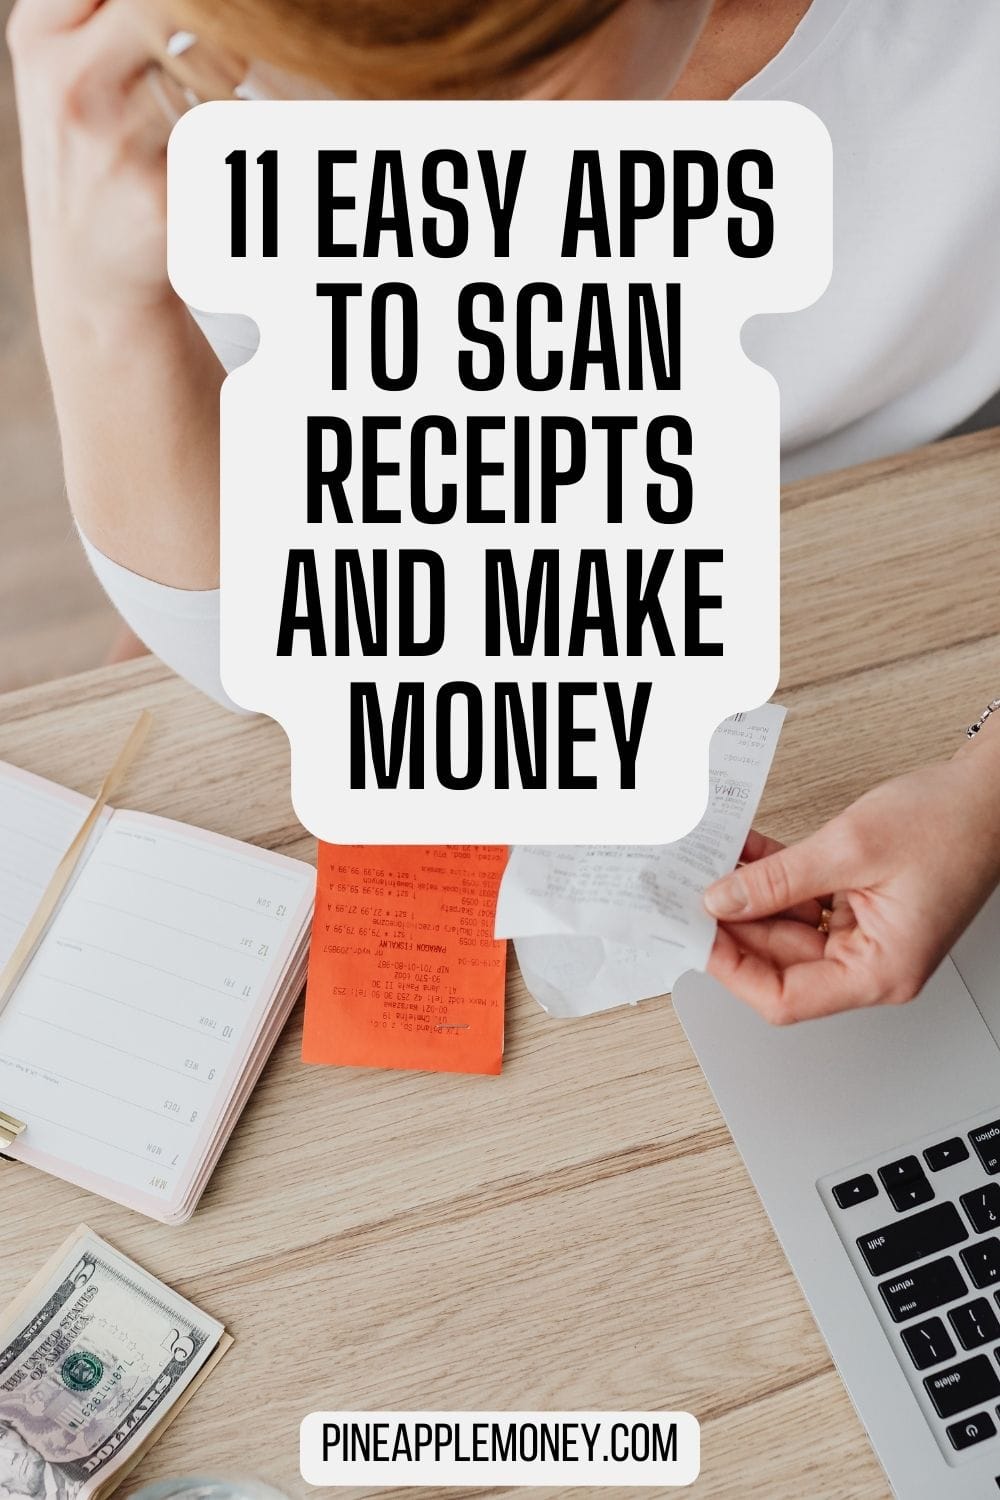 Easy Apps To Scan Receipts and Make Money Pin